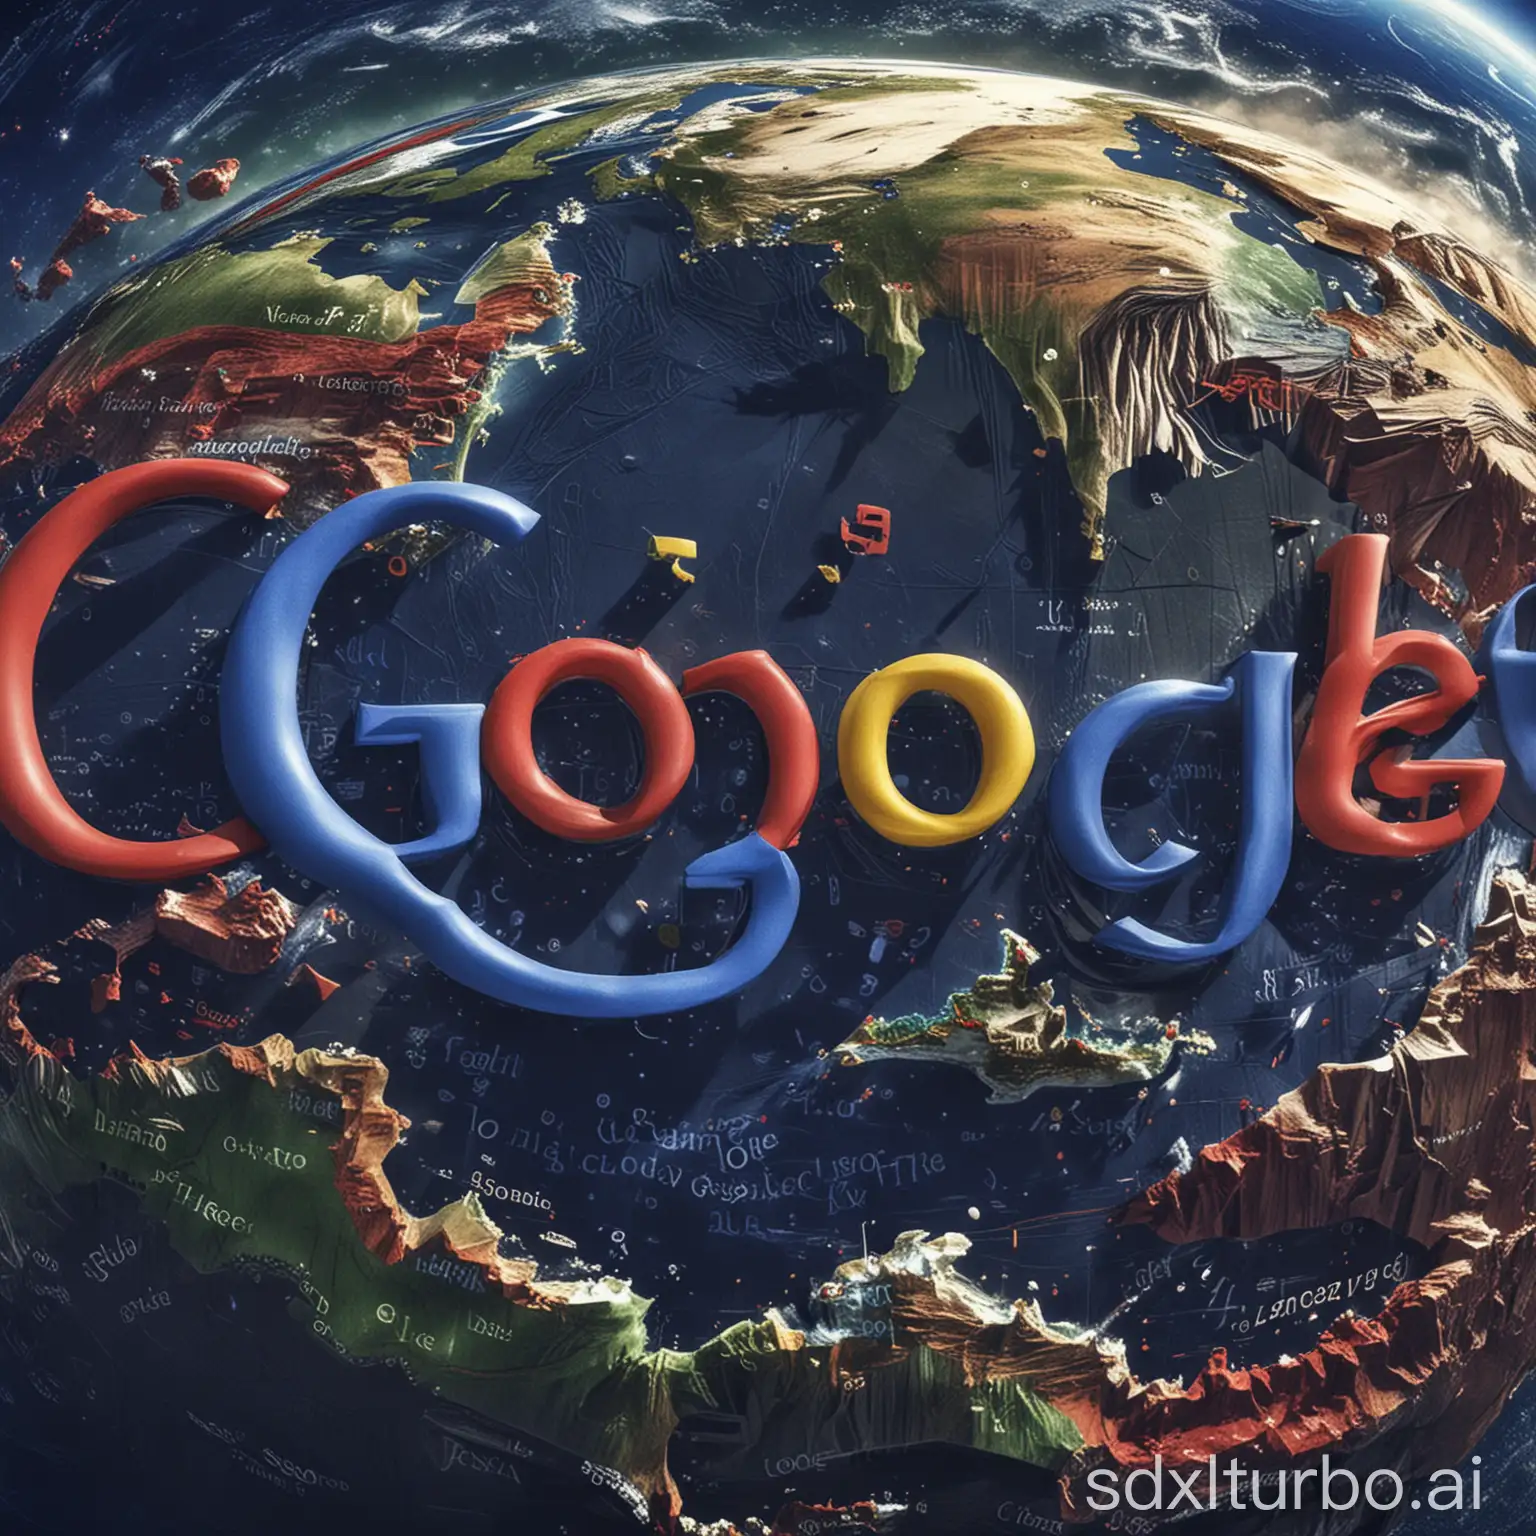 A close-up of the Google logo. The logo is made up of the words "Google" in a blue and red font. The "o" in "Google" is a stylized image of the Earth.